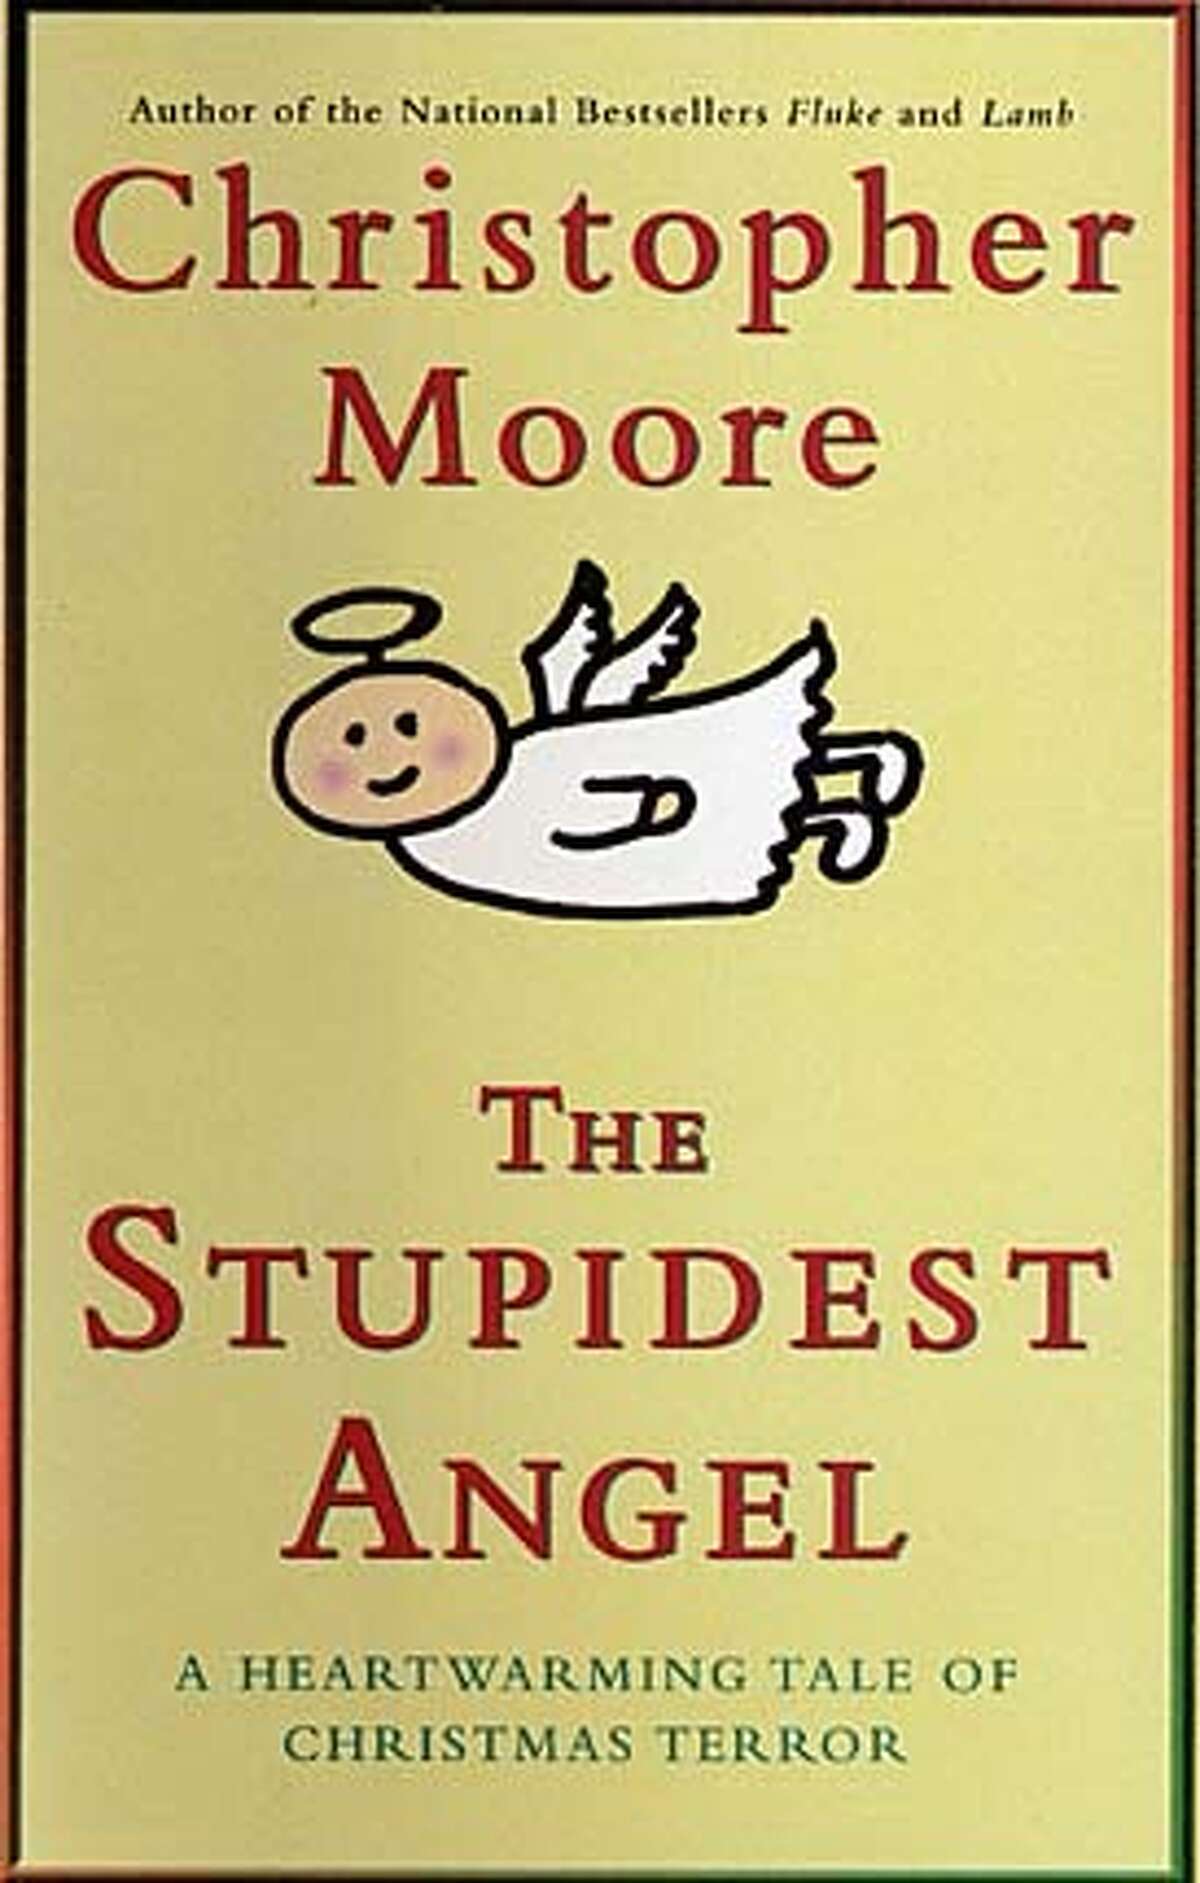 The Stupidest Angle by Christopher Moore BookReview#BookReview#Chronicle#11-07-2004#ALL#Advance#M6#0422449956 BookReview#BookReview#Chronicle#11-07-2004#ALL#Advance#M6#0422449956